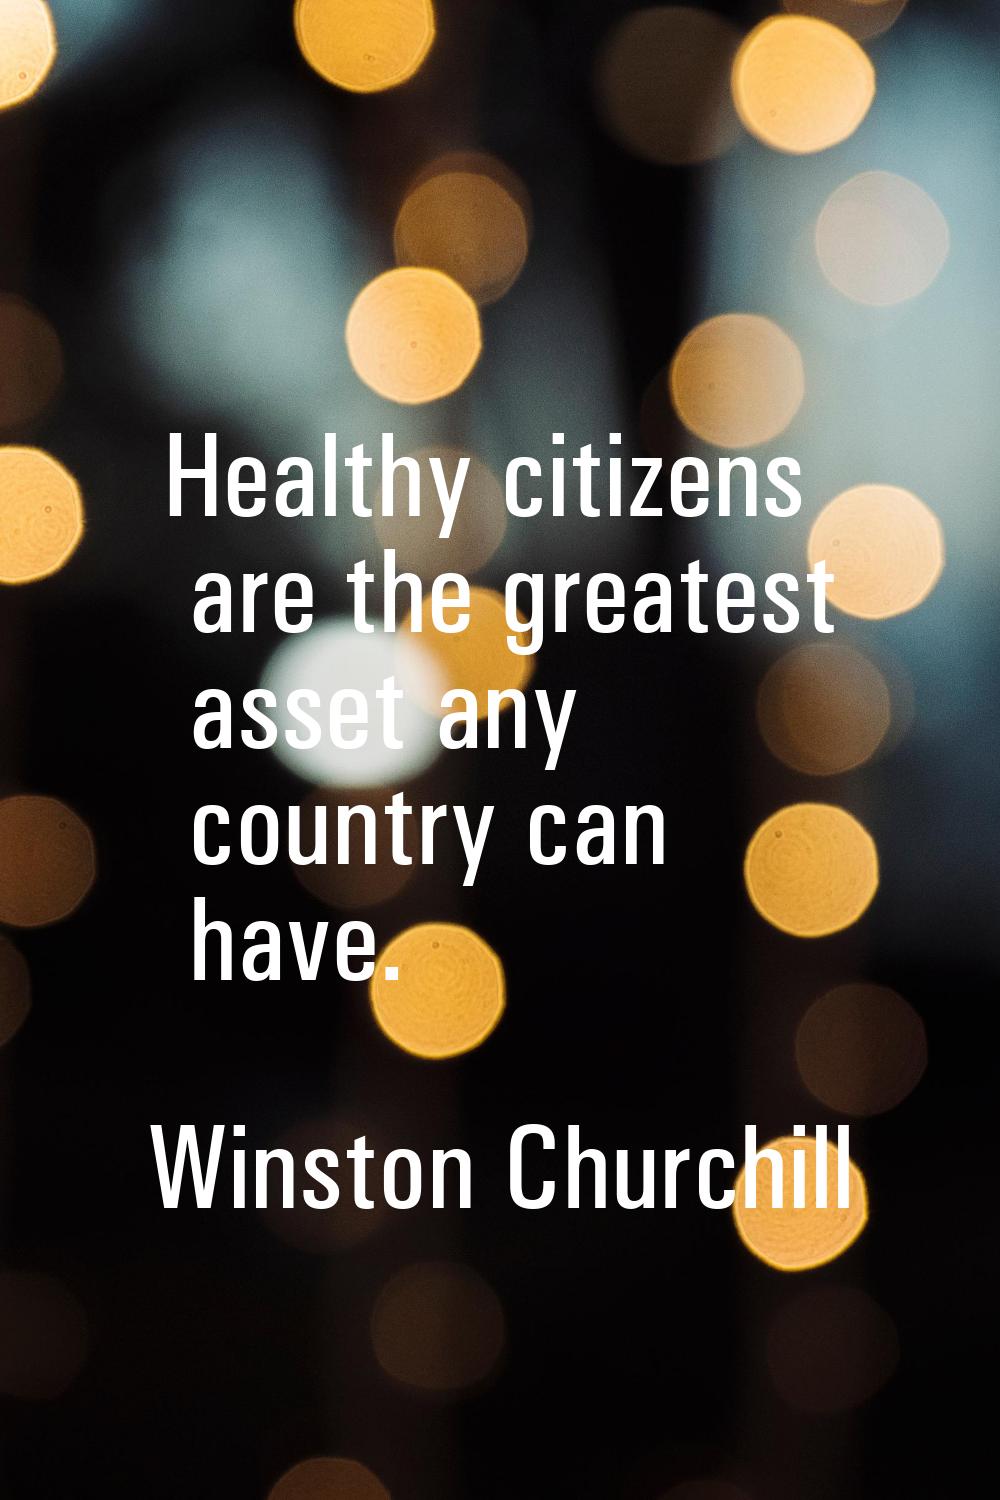 Healthy citizens are the greatest asset any country can have.